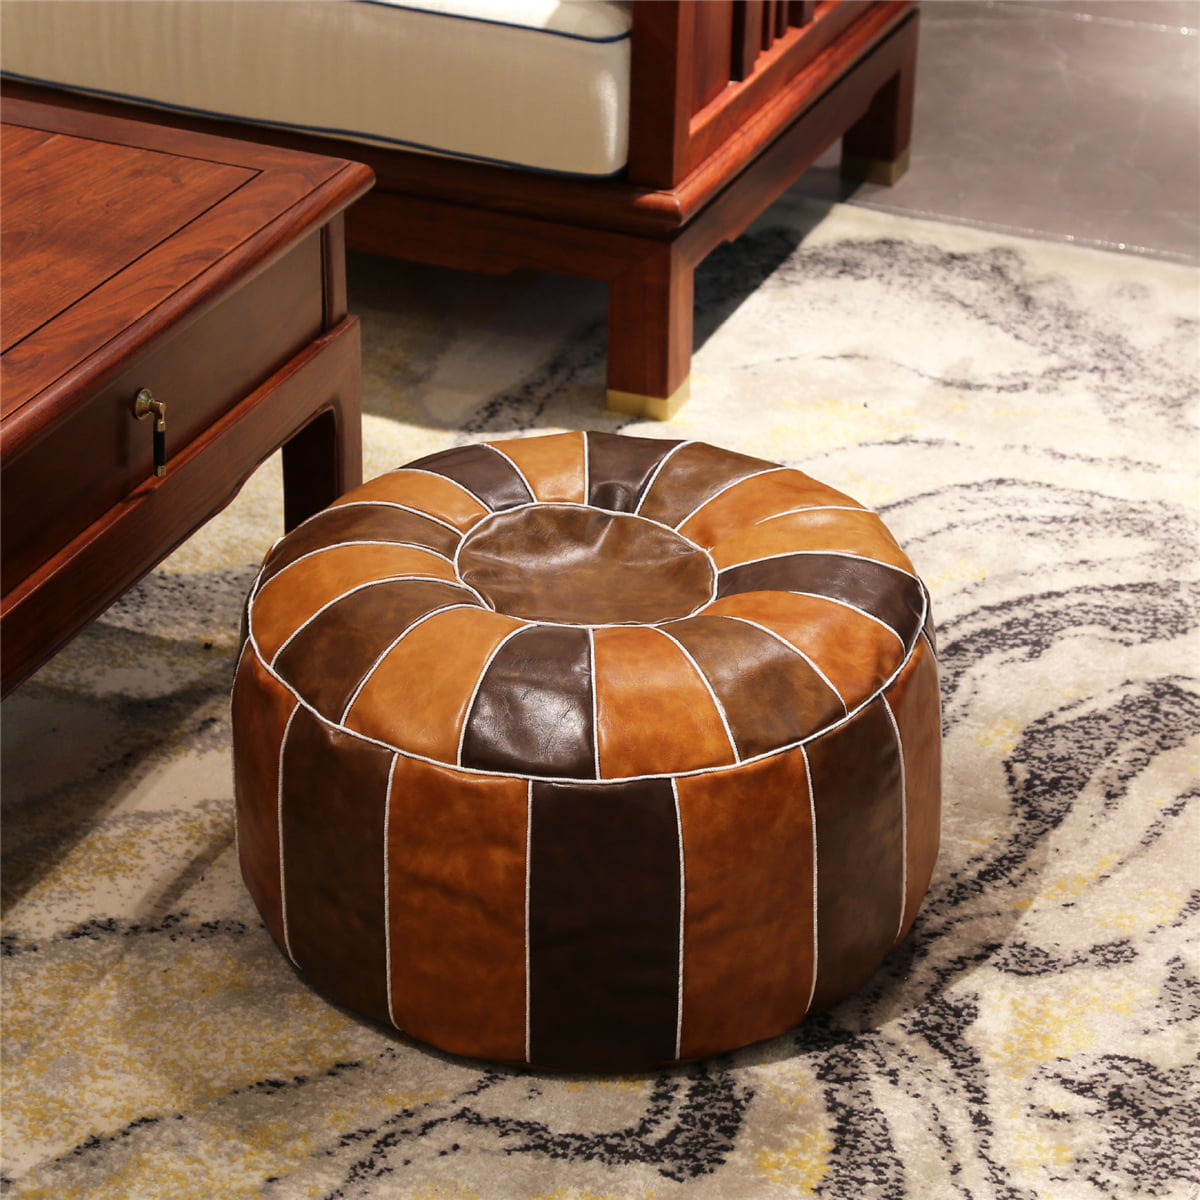 Moroccan Leather Pouf Handmade, Leather Pouf Ottoman